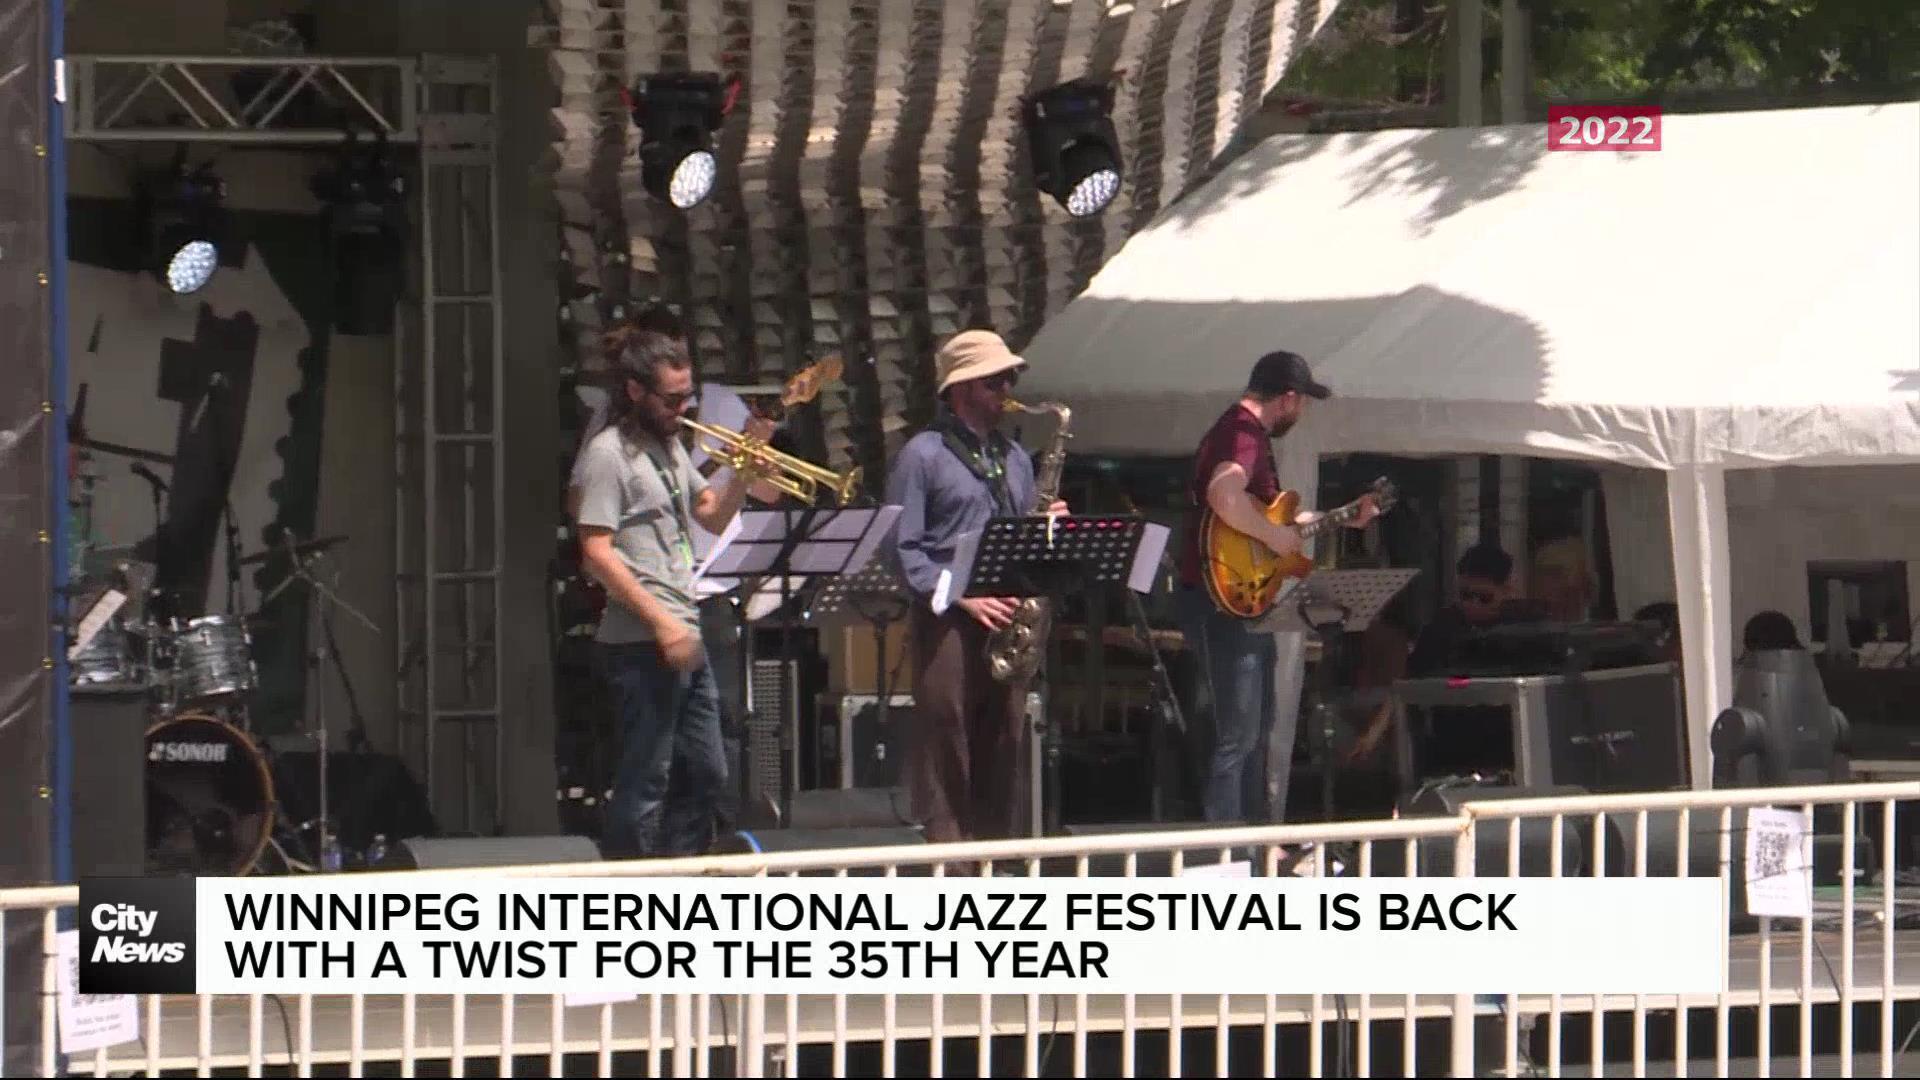 Local artists get ready to hit the stage at the Winnipeg International Jazz Festival